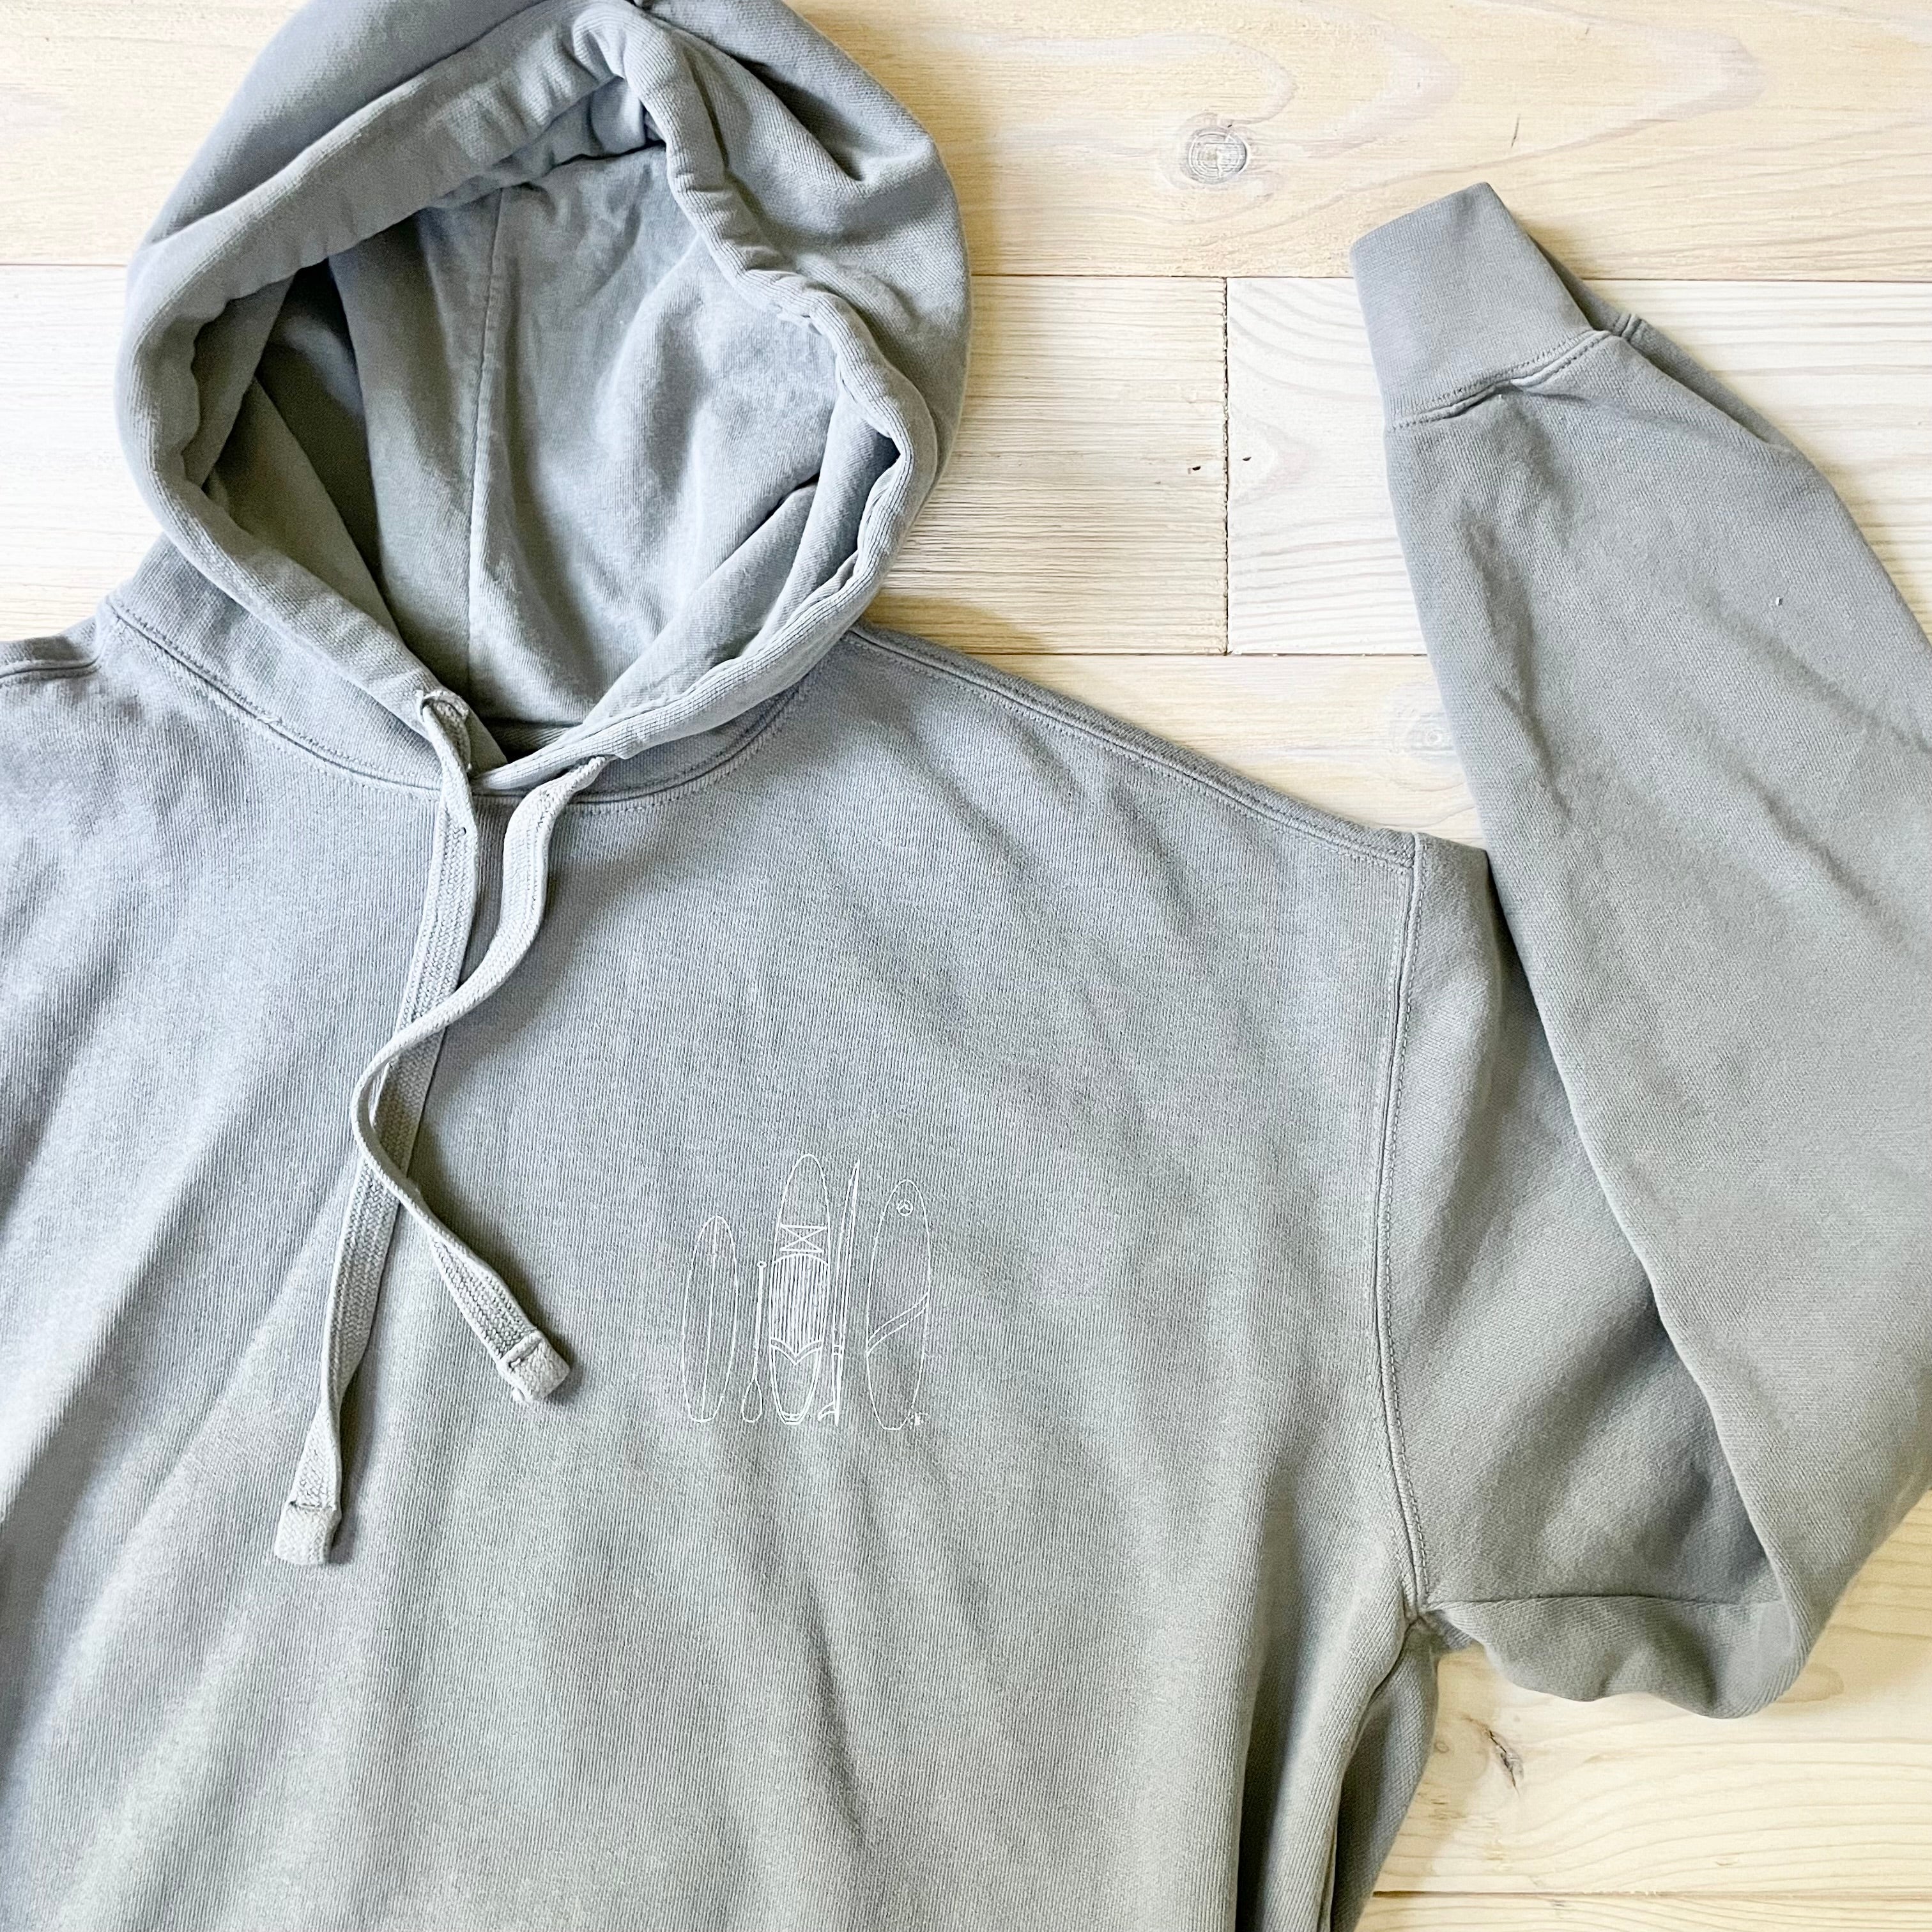 Fog Paddle Board Pullover